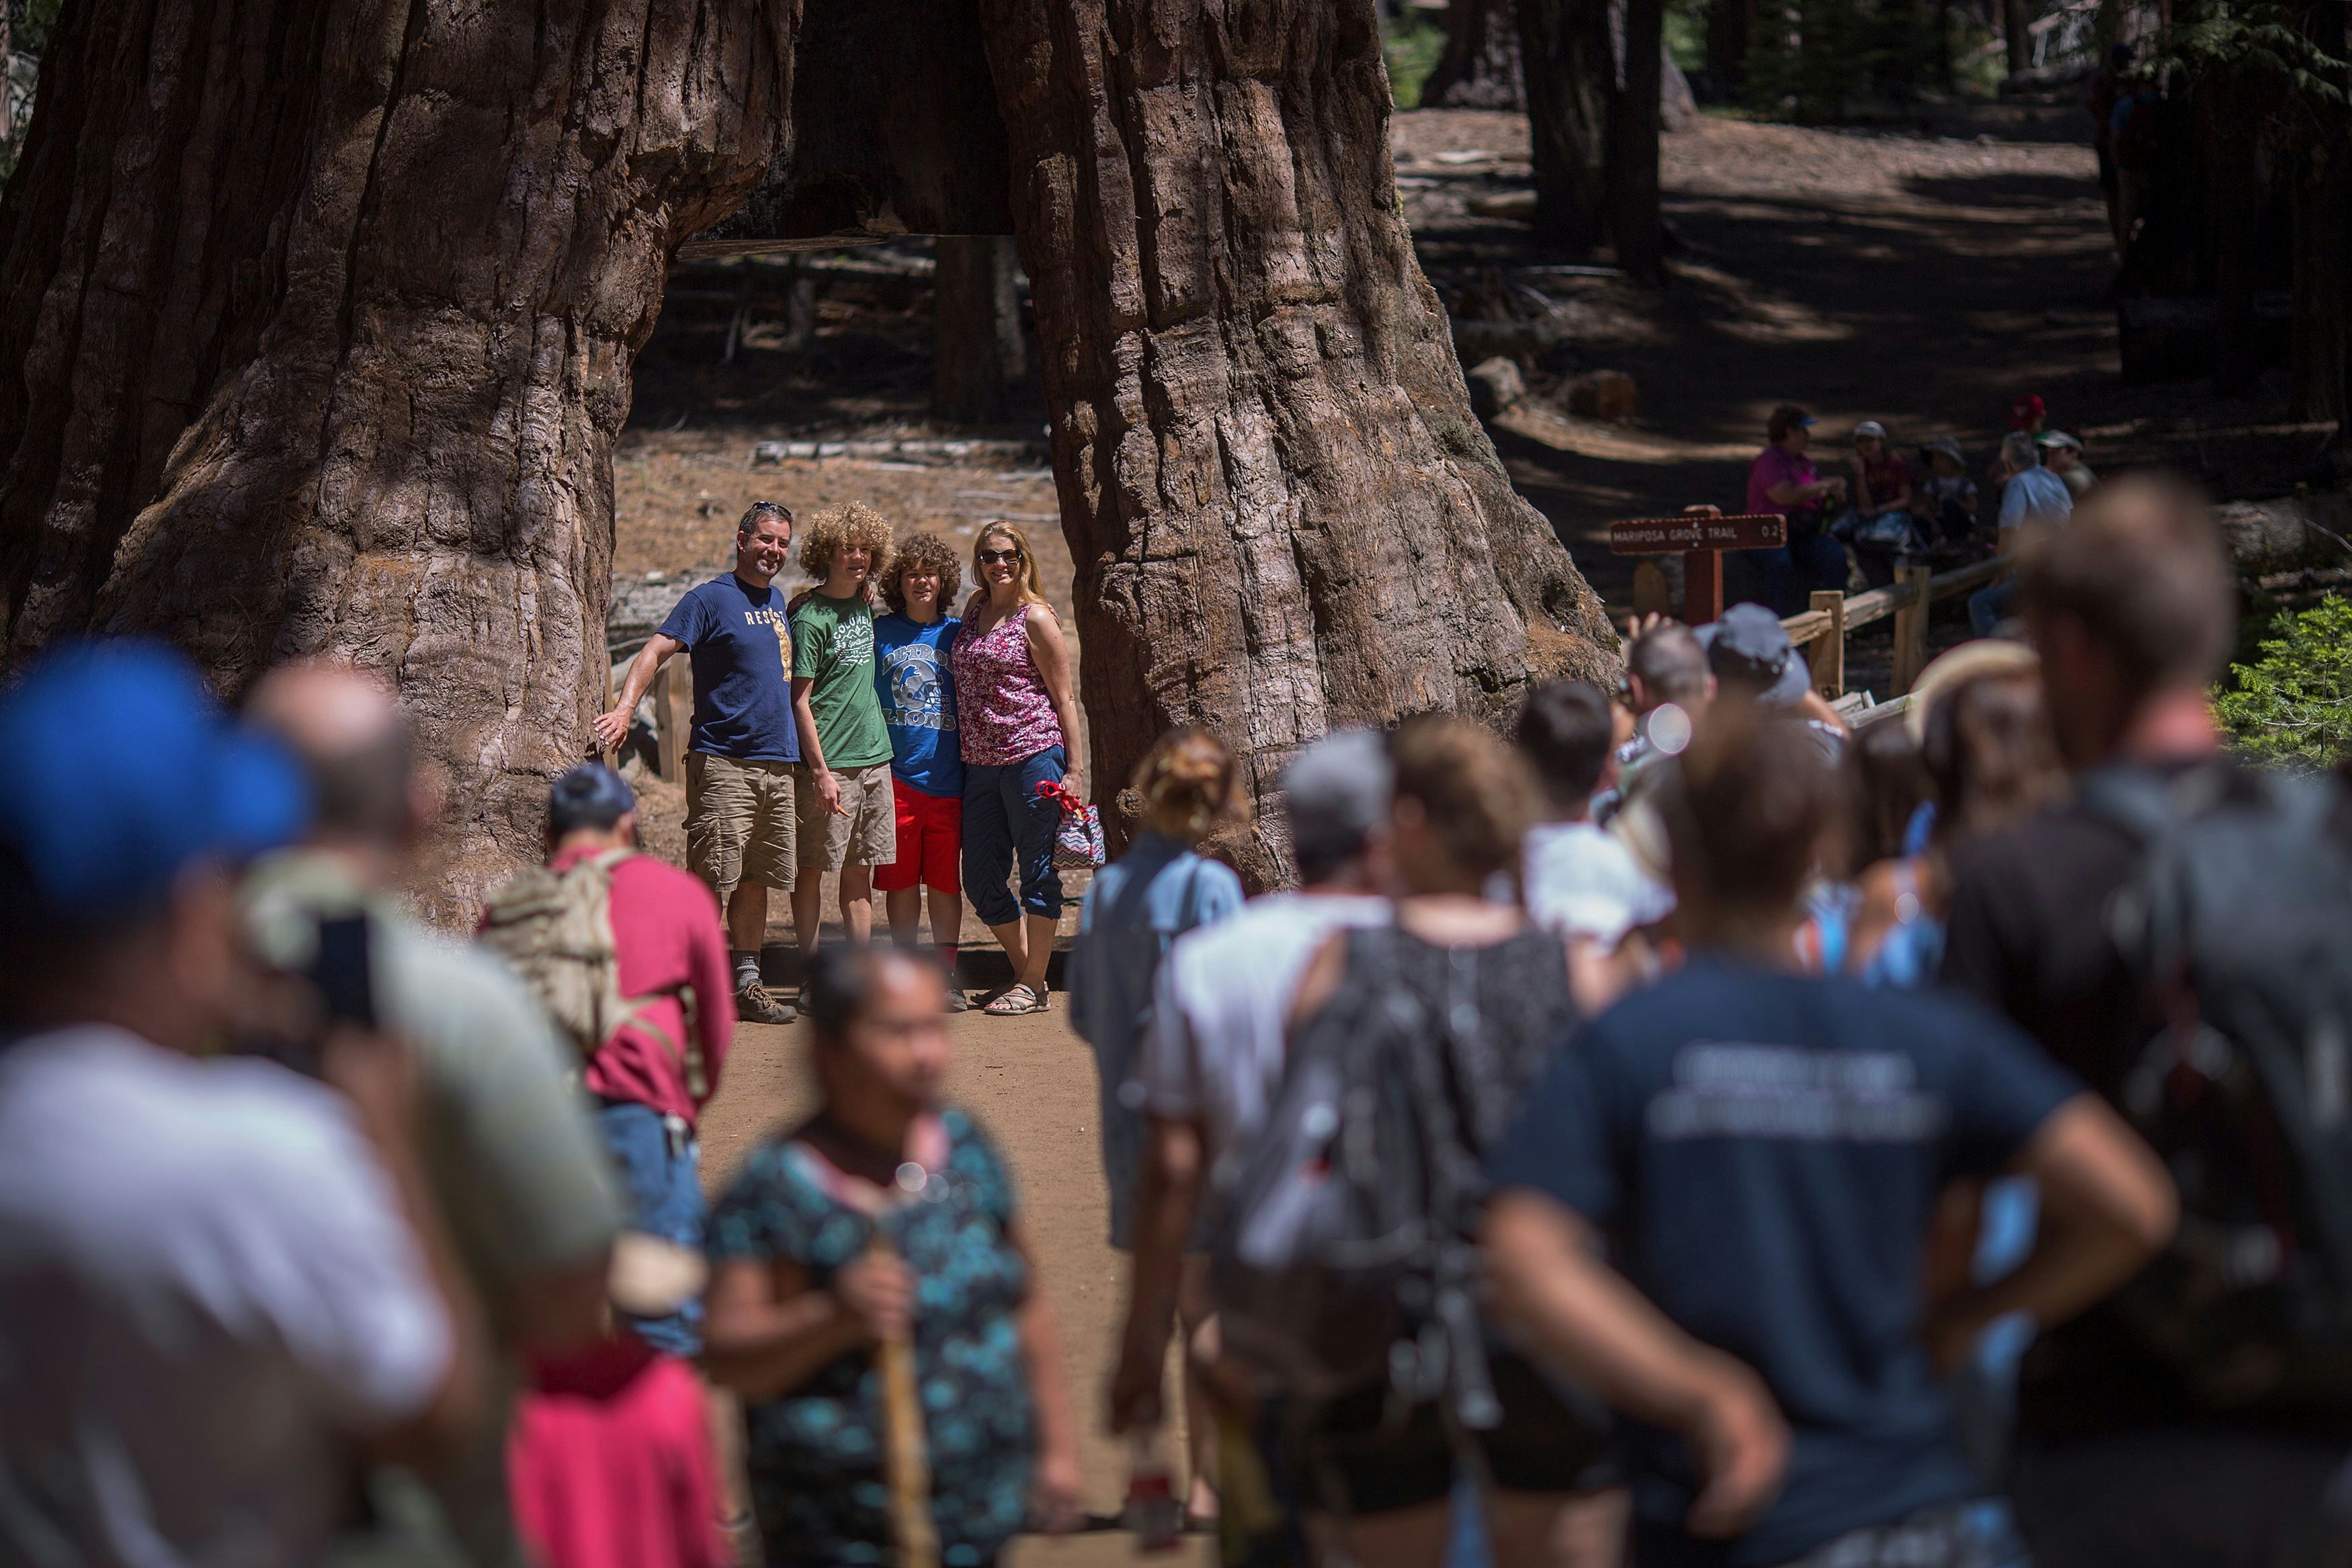 A crowd stands in line to take photos of one another at the California Tunnel Tree